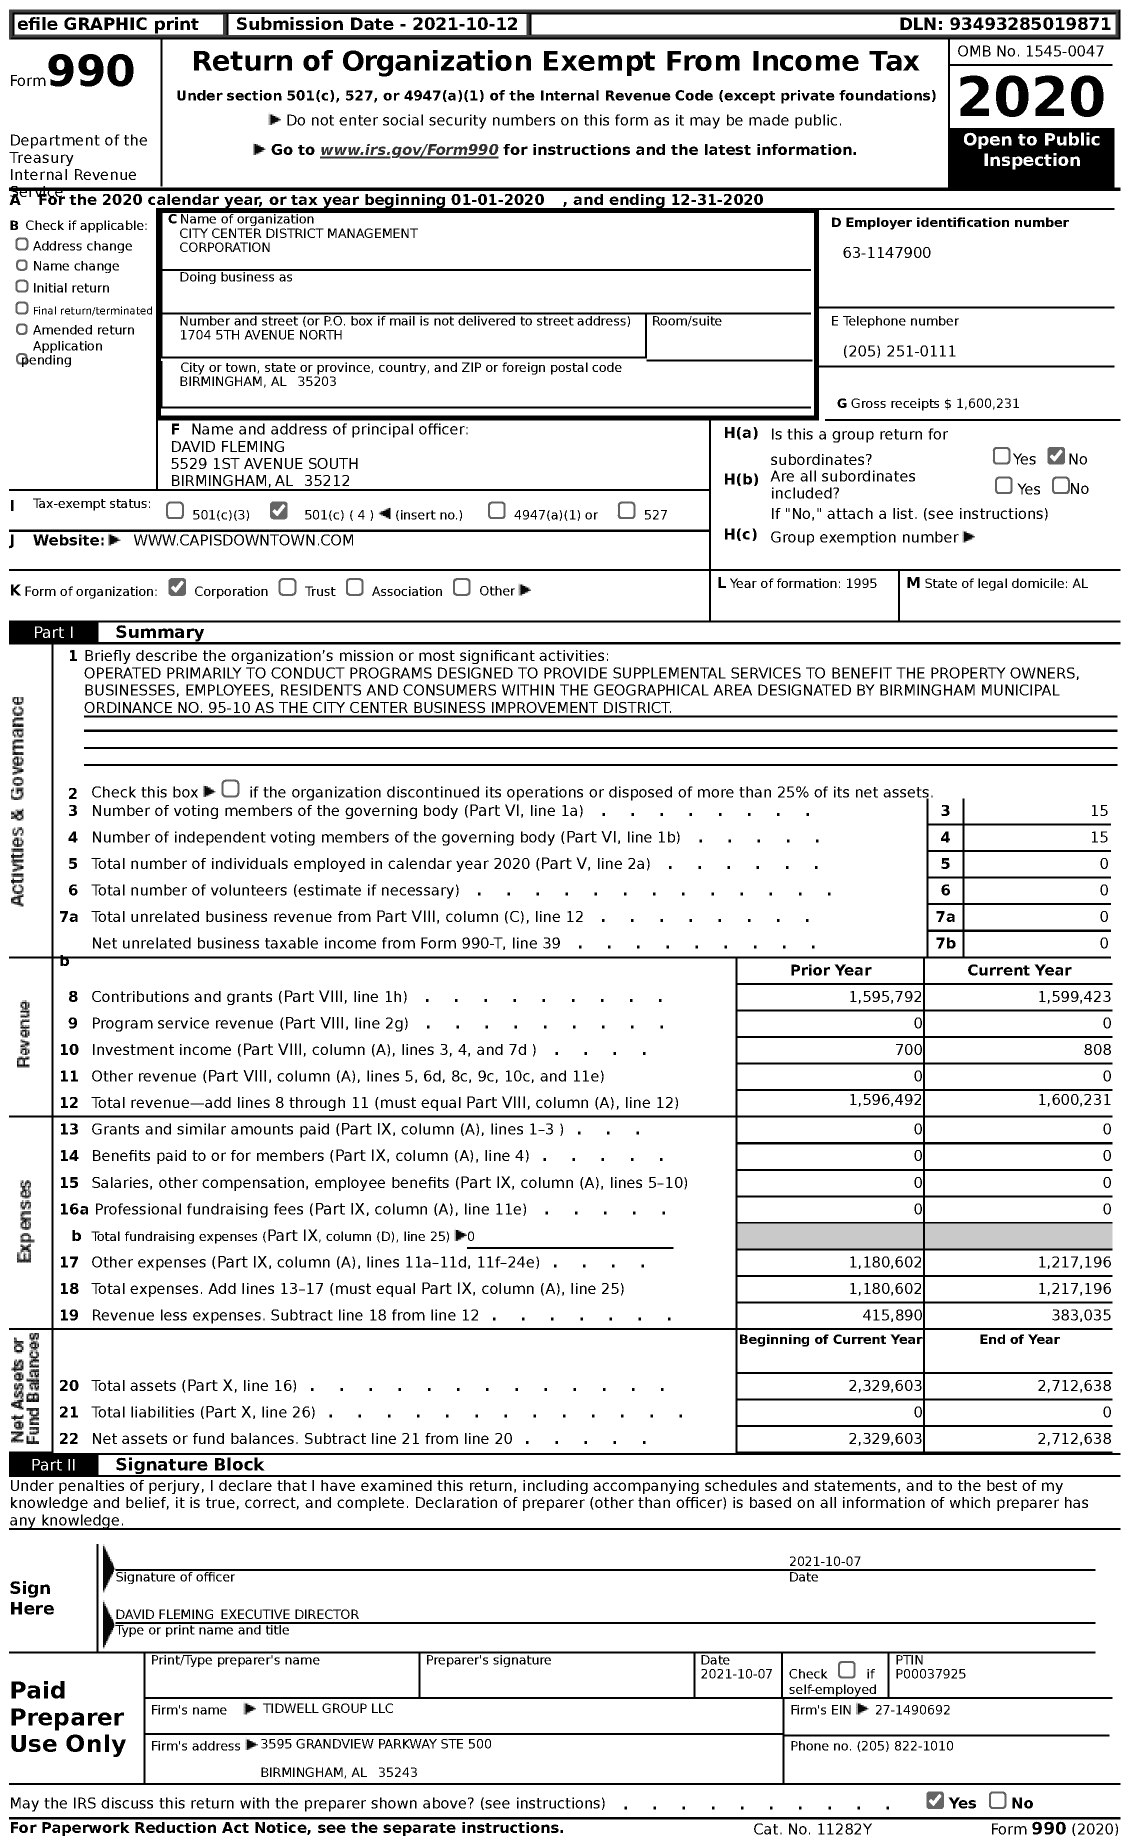 Image of first page of 2020 Form 990 for City Action Partnership (CAP)